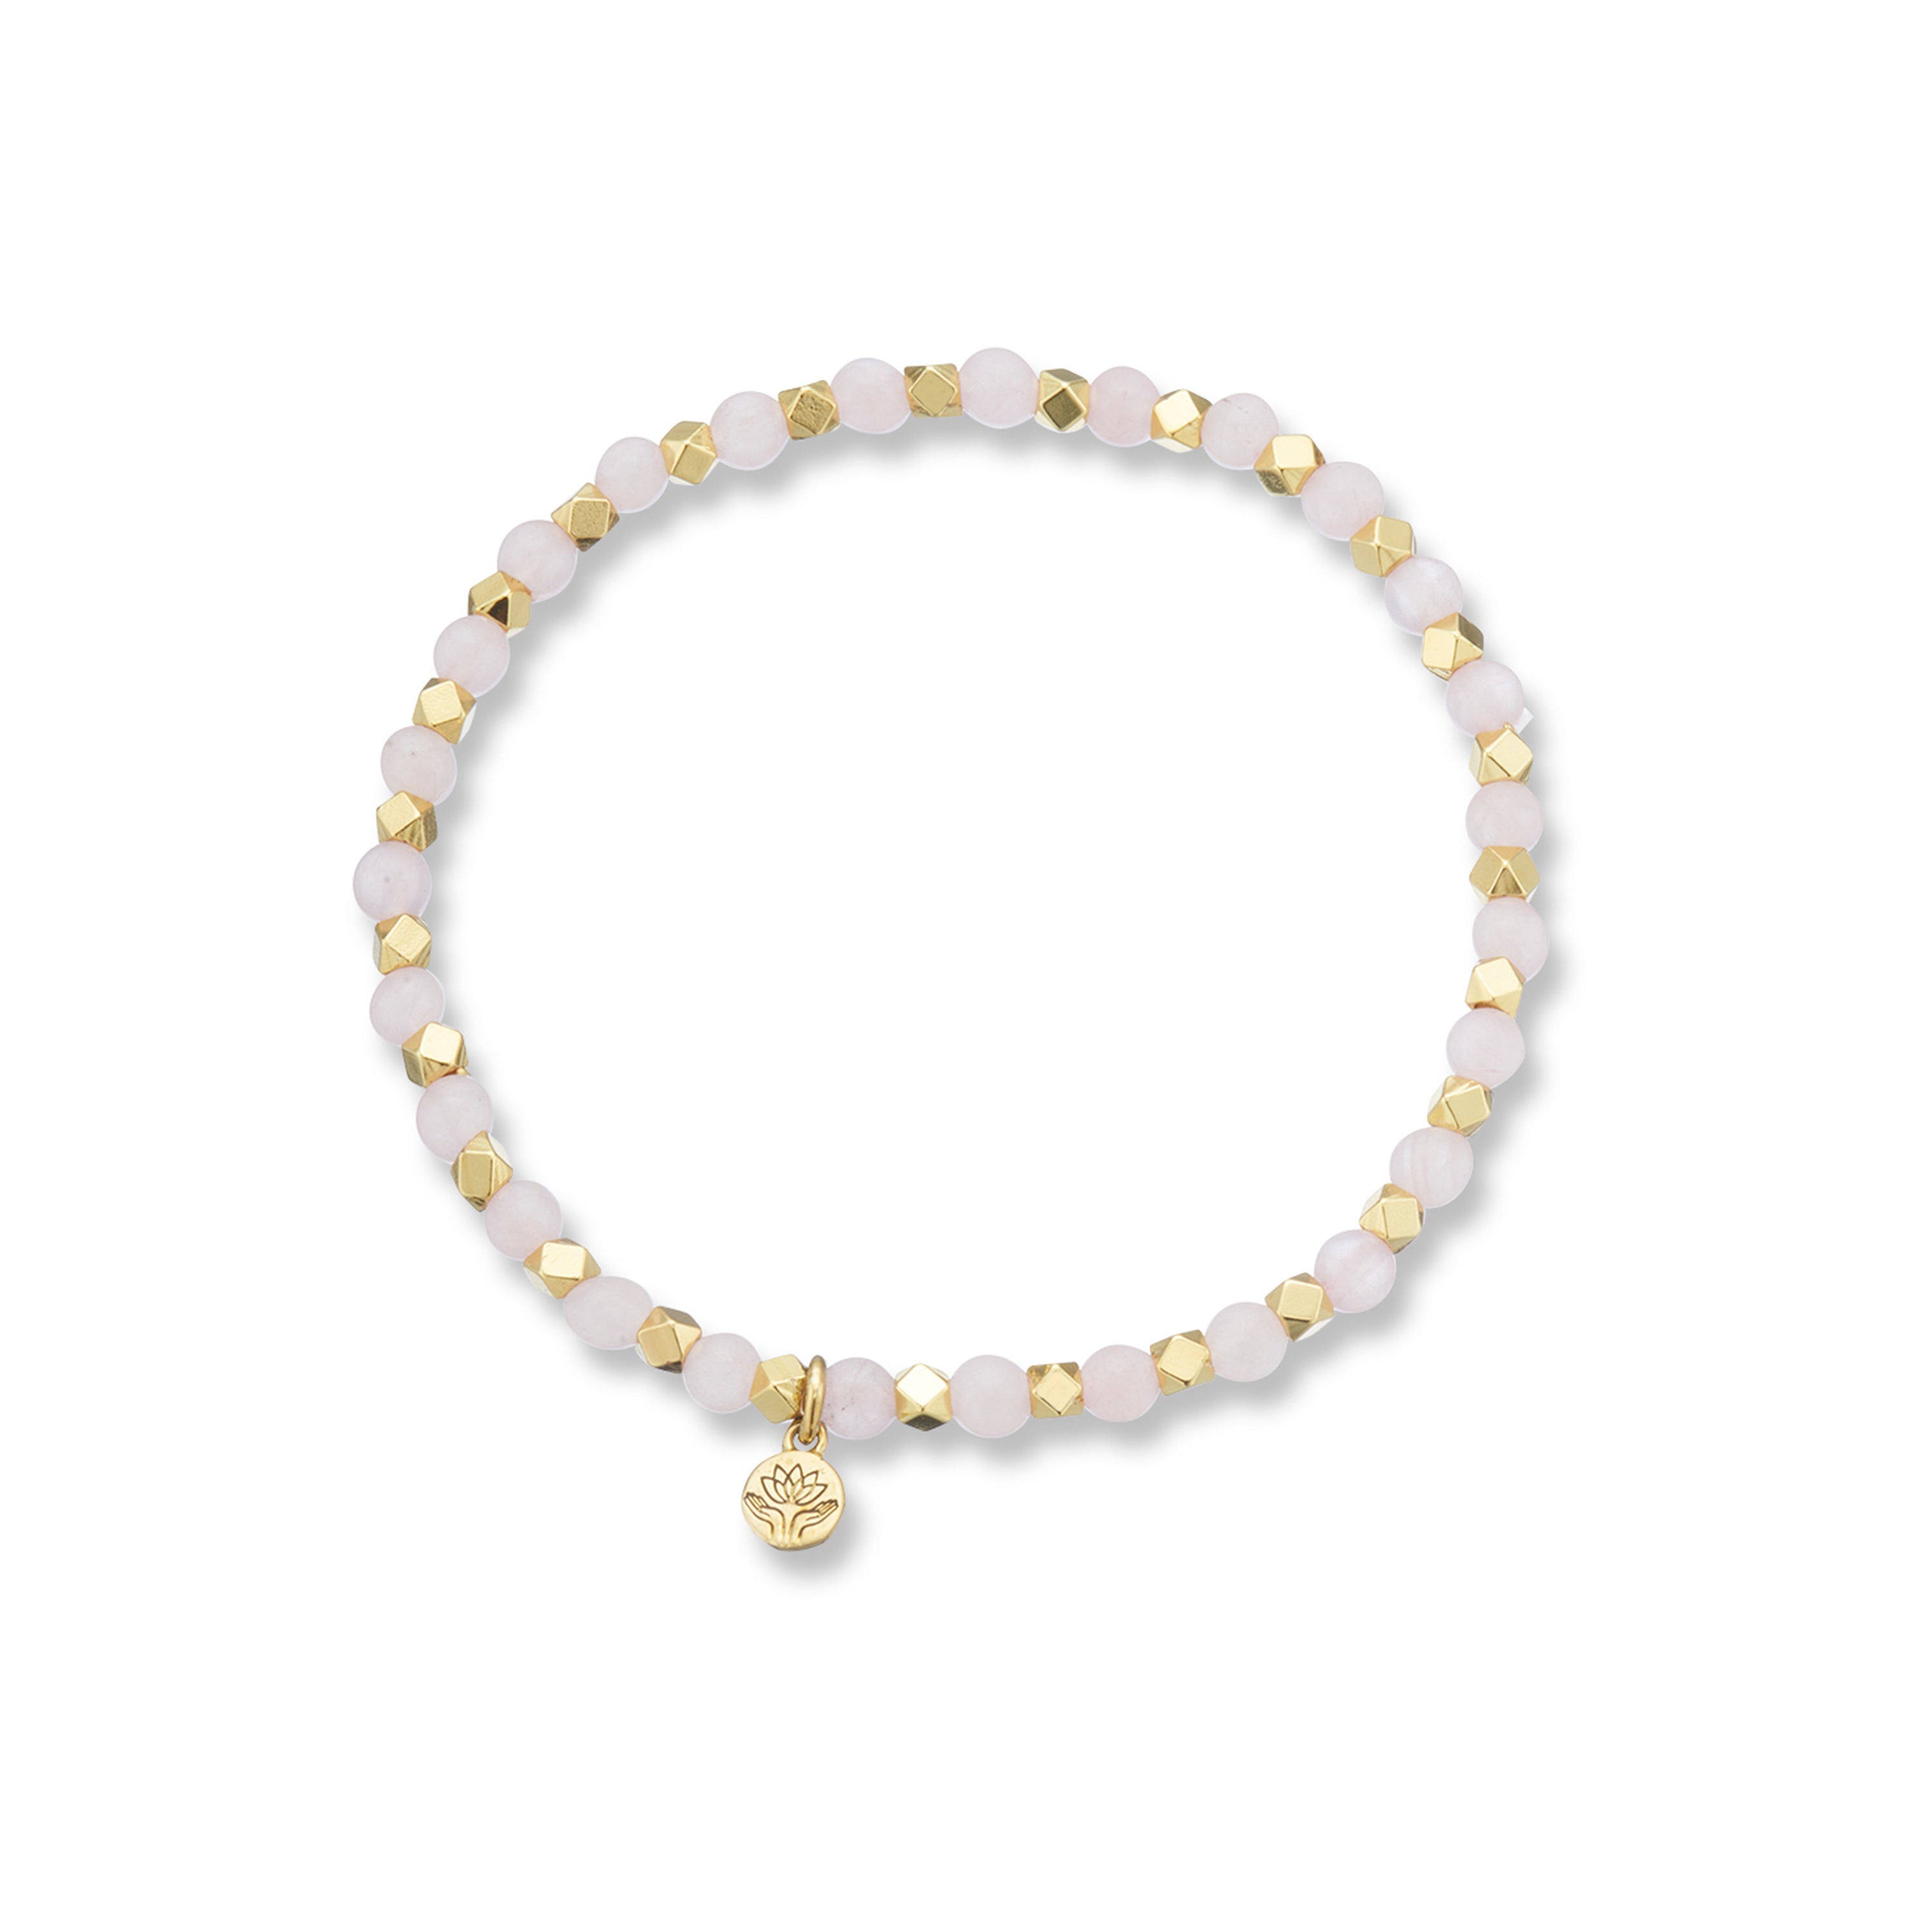 Aura Beaded Necklace in Yellow, Rose and White Gold